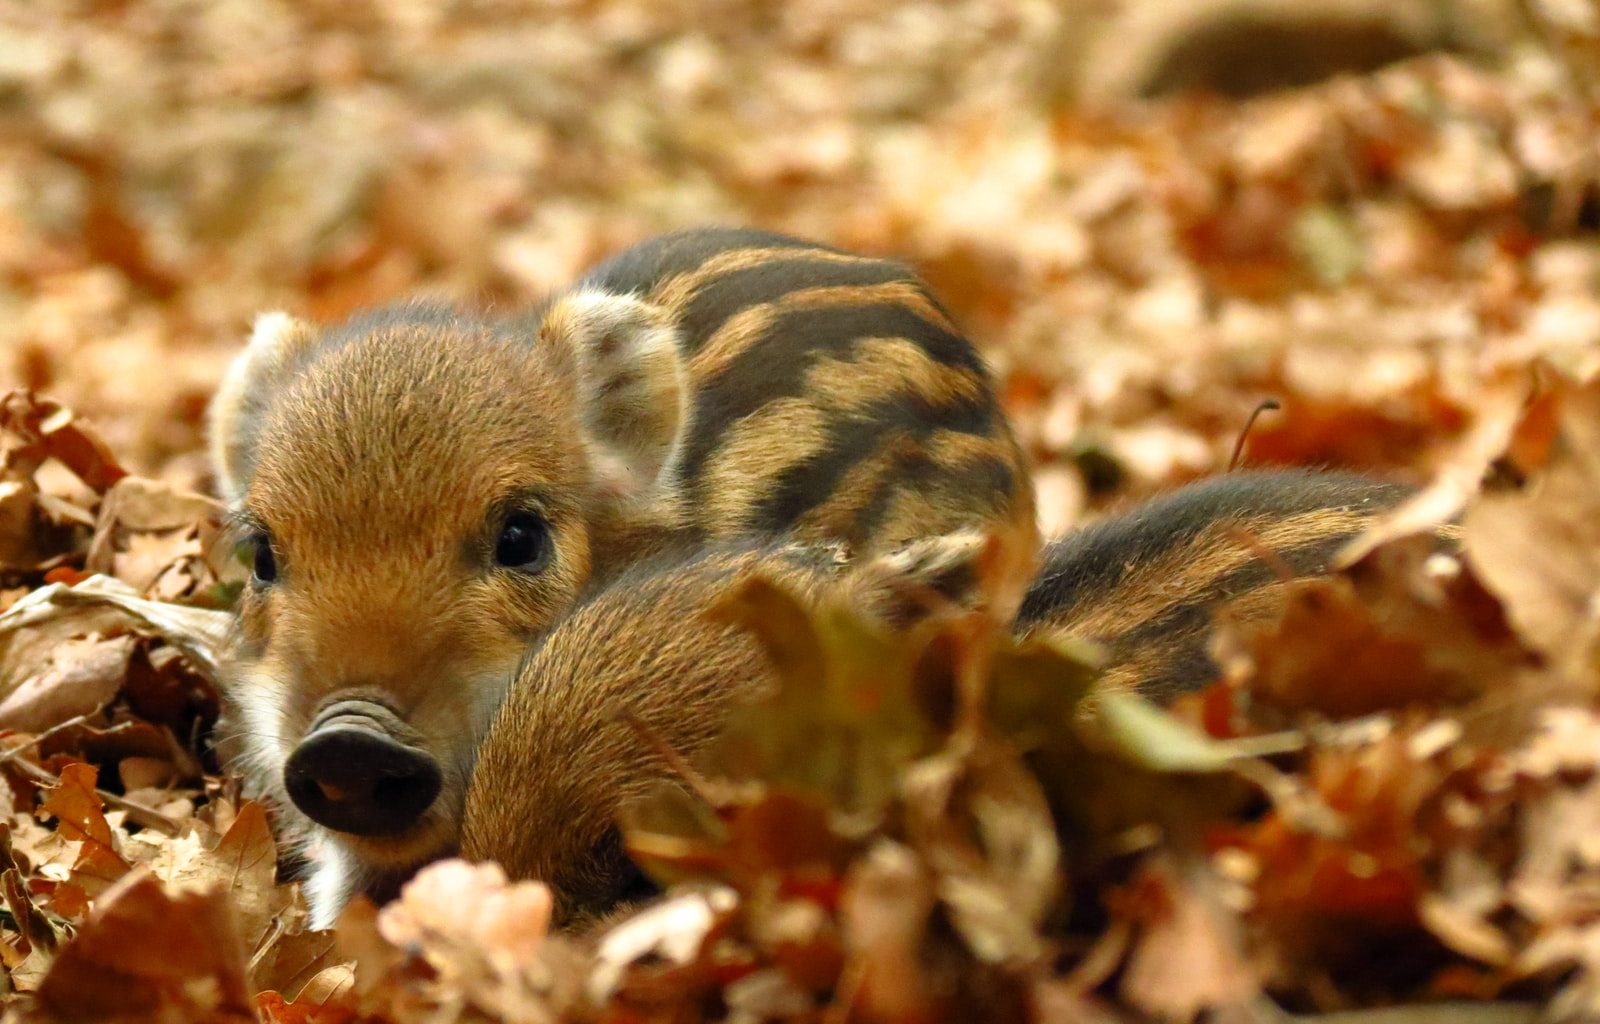 two brown piglets on leaves